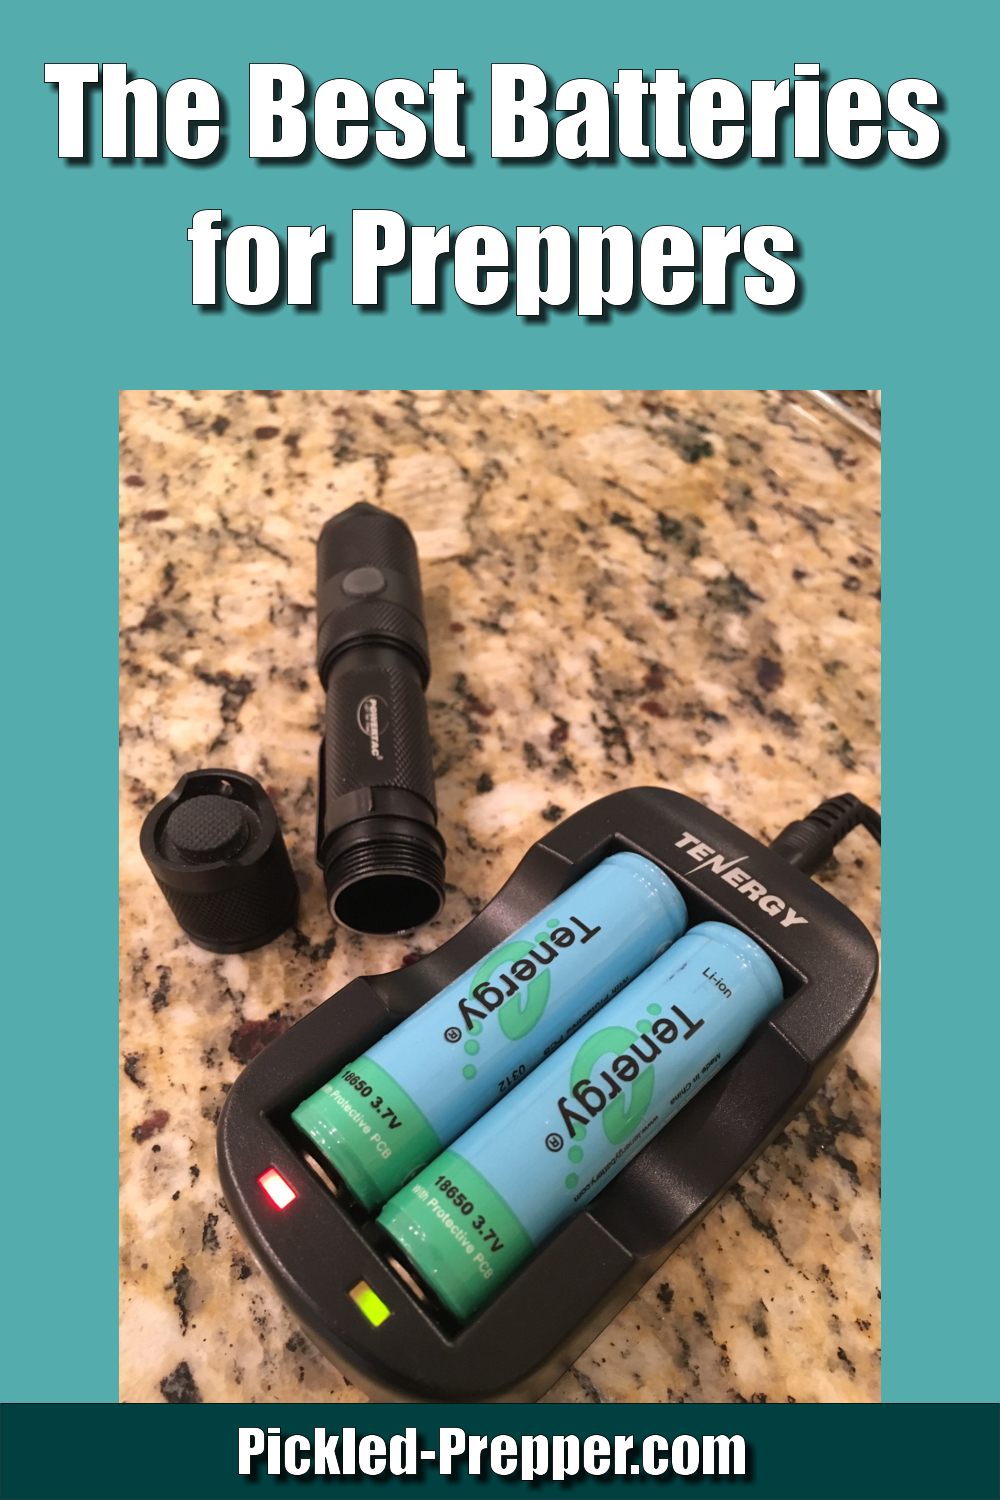 The Best Batteries for Preppers